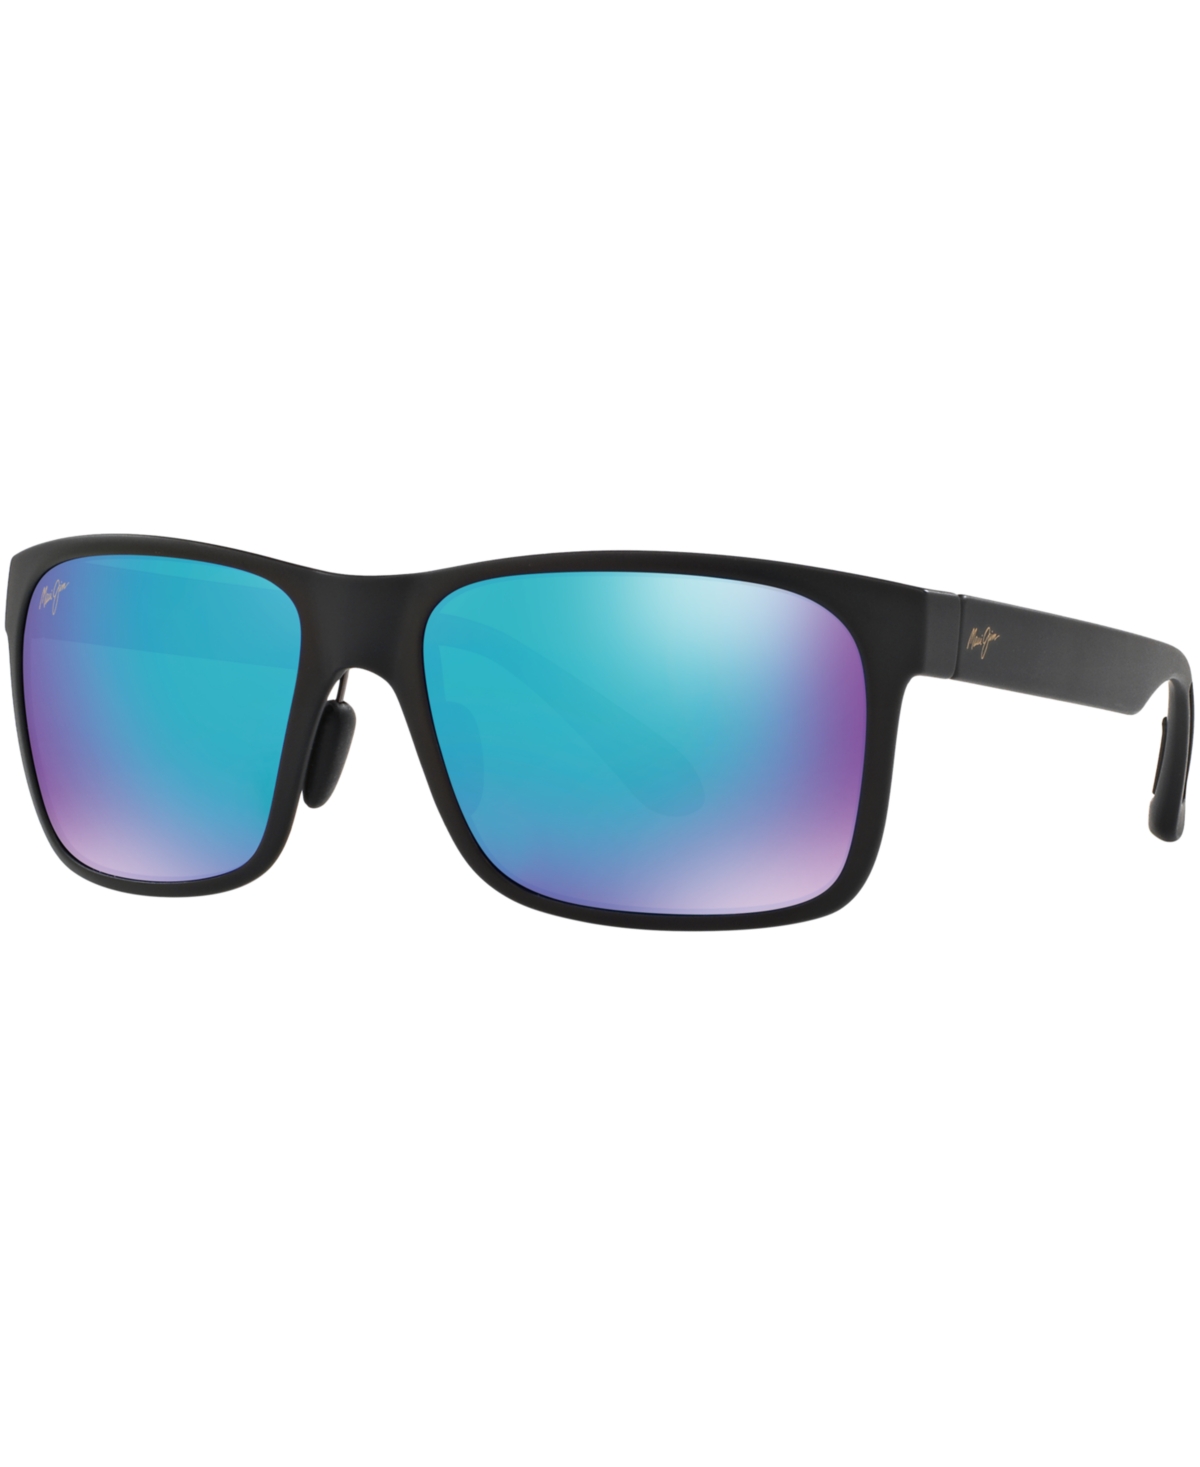 Maui Jim Red Sands Polarized Sunglasses , 432 Blue Hawaii Collection In Black Matte,blue Mirror Polar